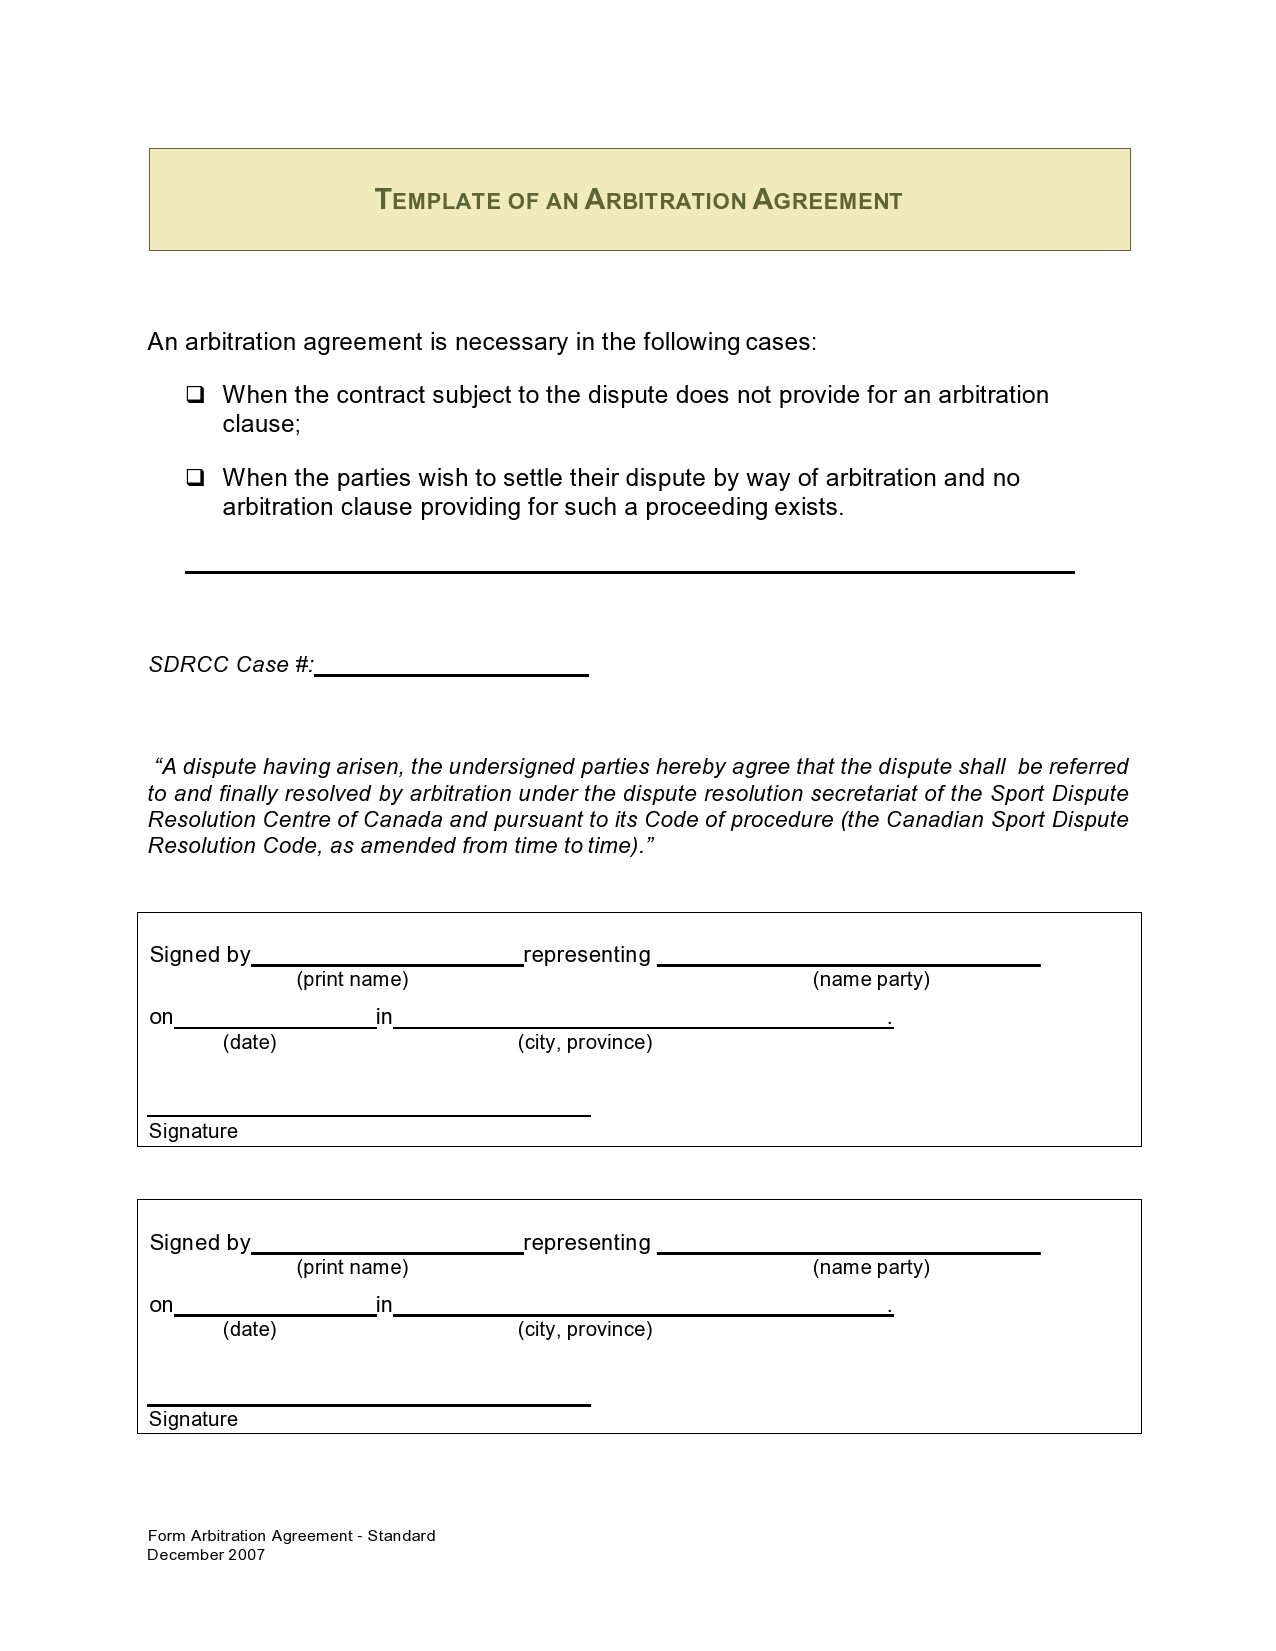 Arbitration Agreement Template